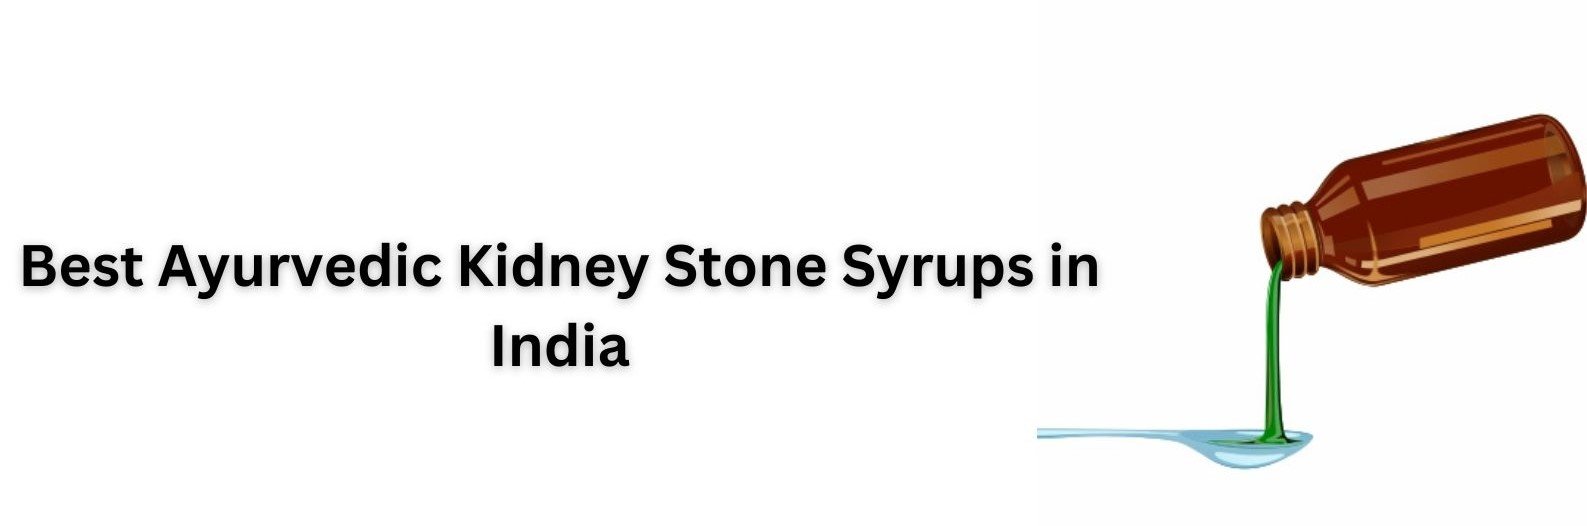 Best Ayurvedic Kidney Stone Syrups in India